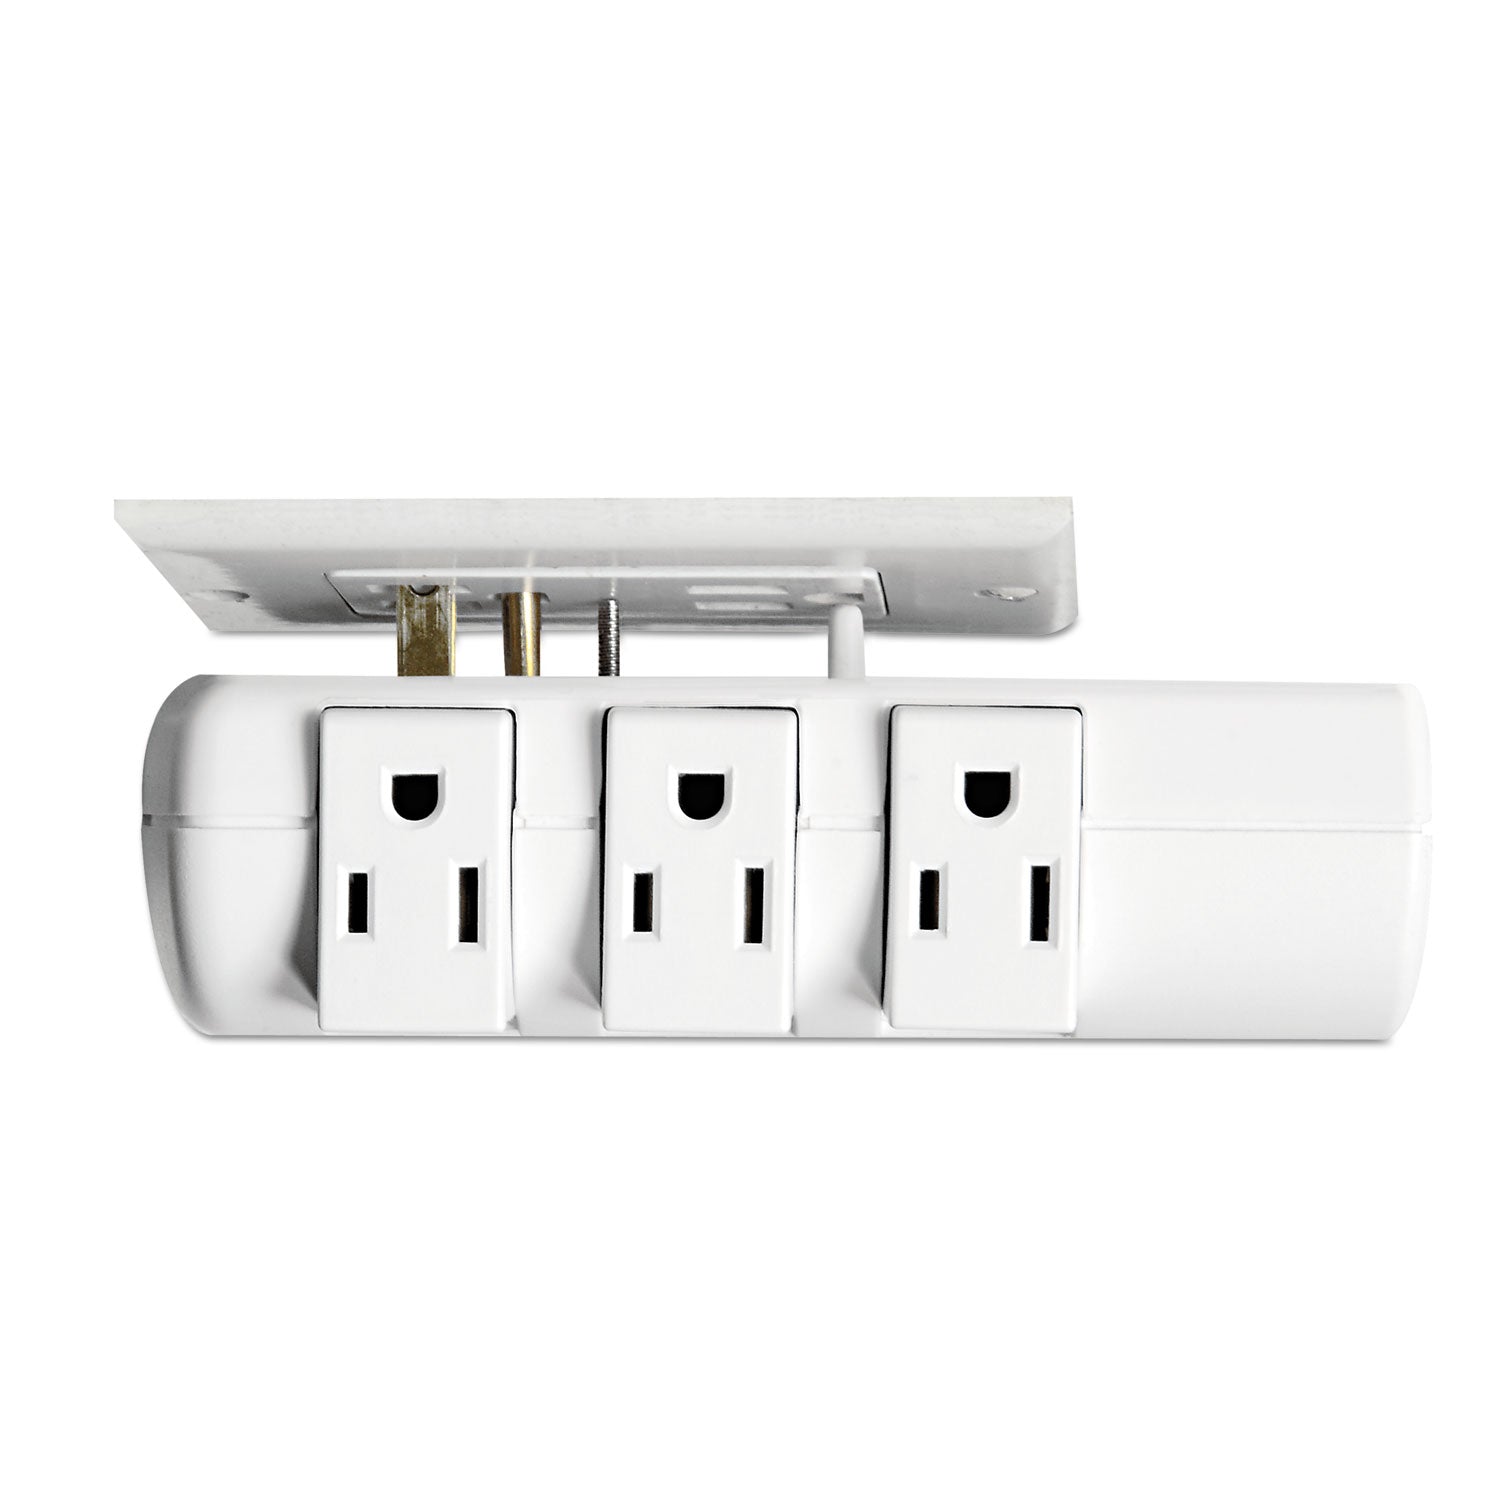 Wall Mount Surge Protector, 6 AC Outlets, 2,160 J, White - 